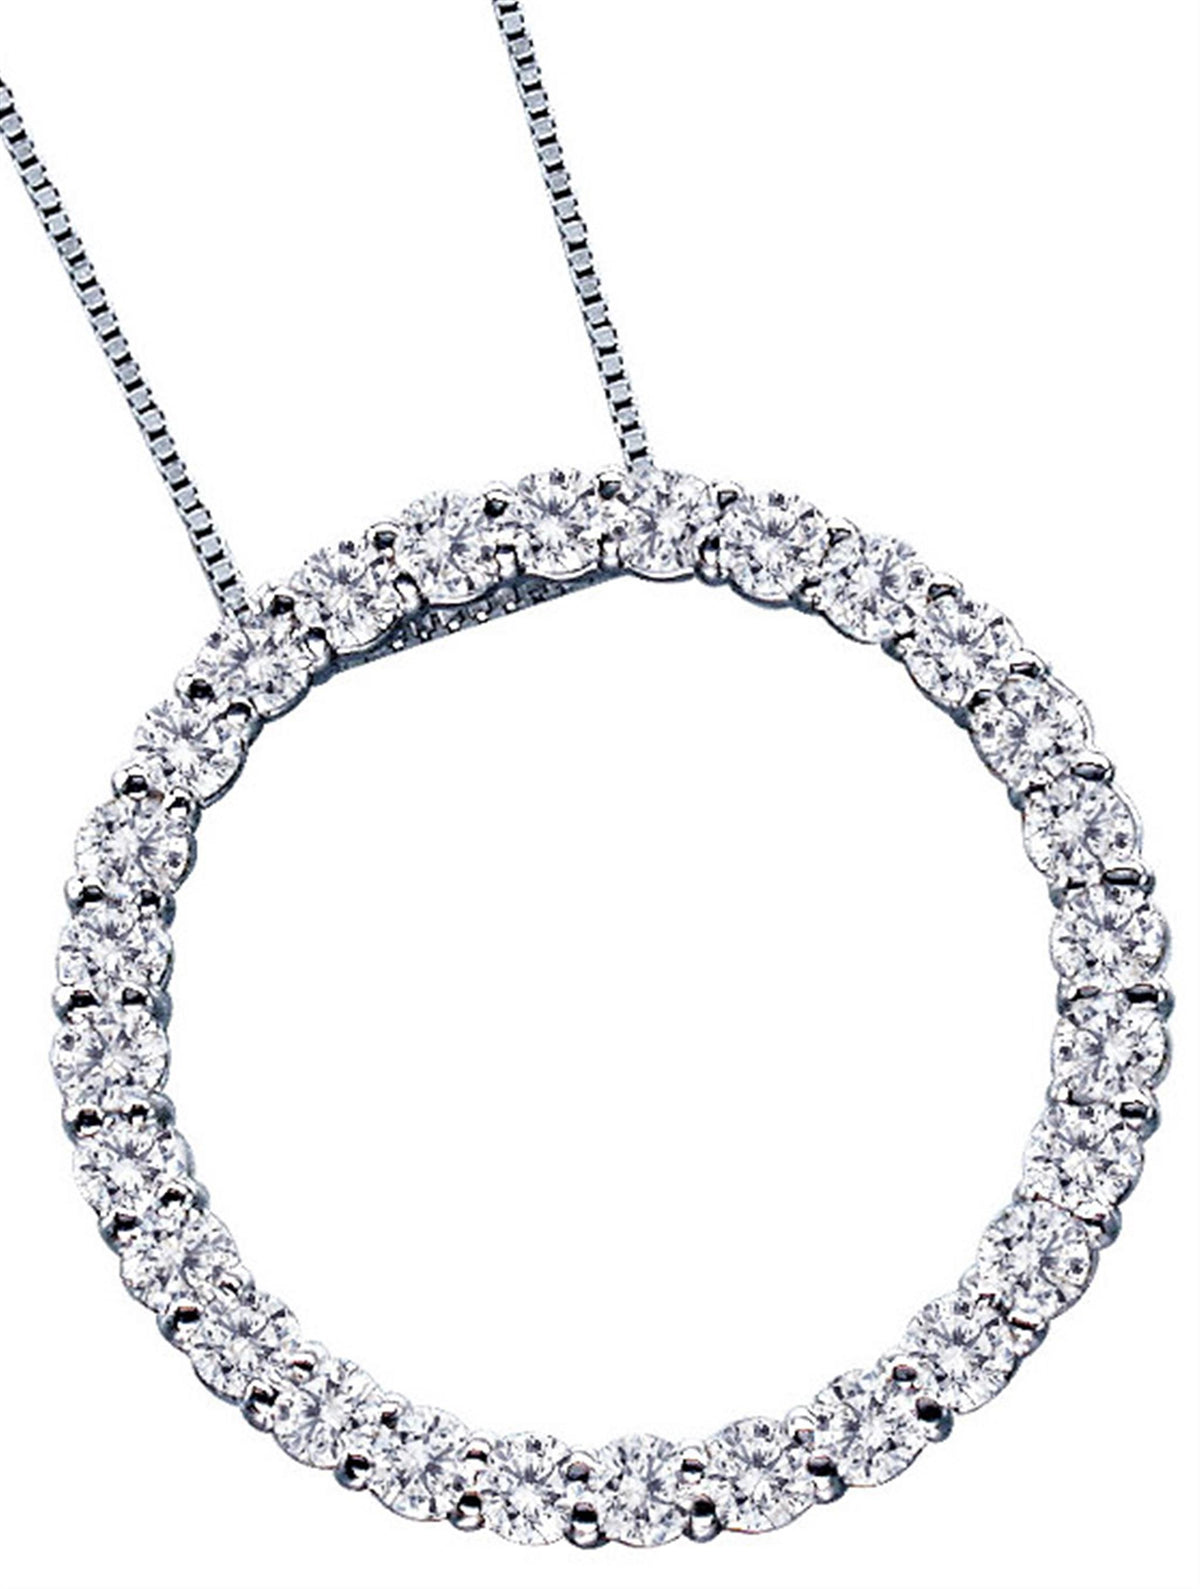 14Kt White Gold Circle Of Life Pendant With 1.00cttw Natural Diamonds